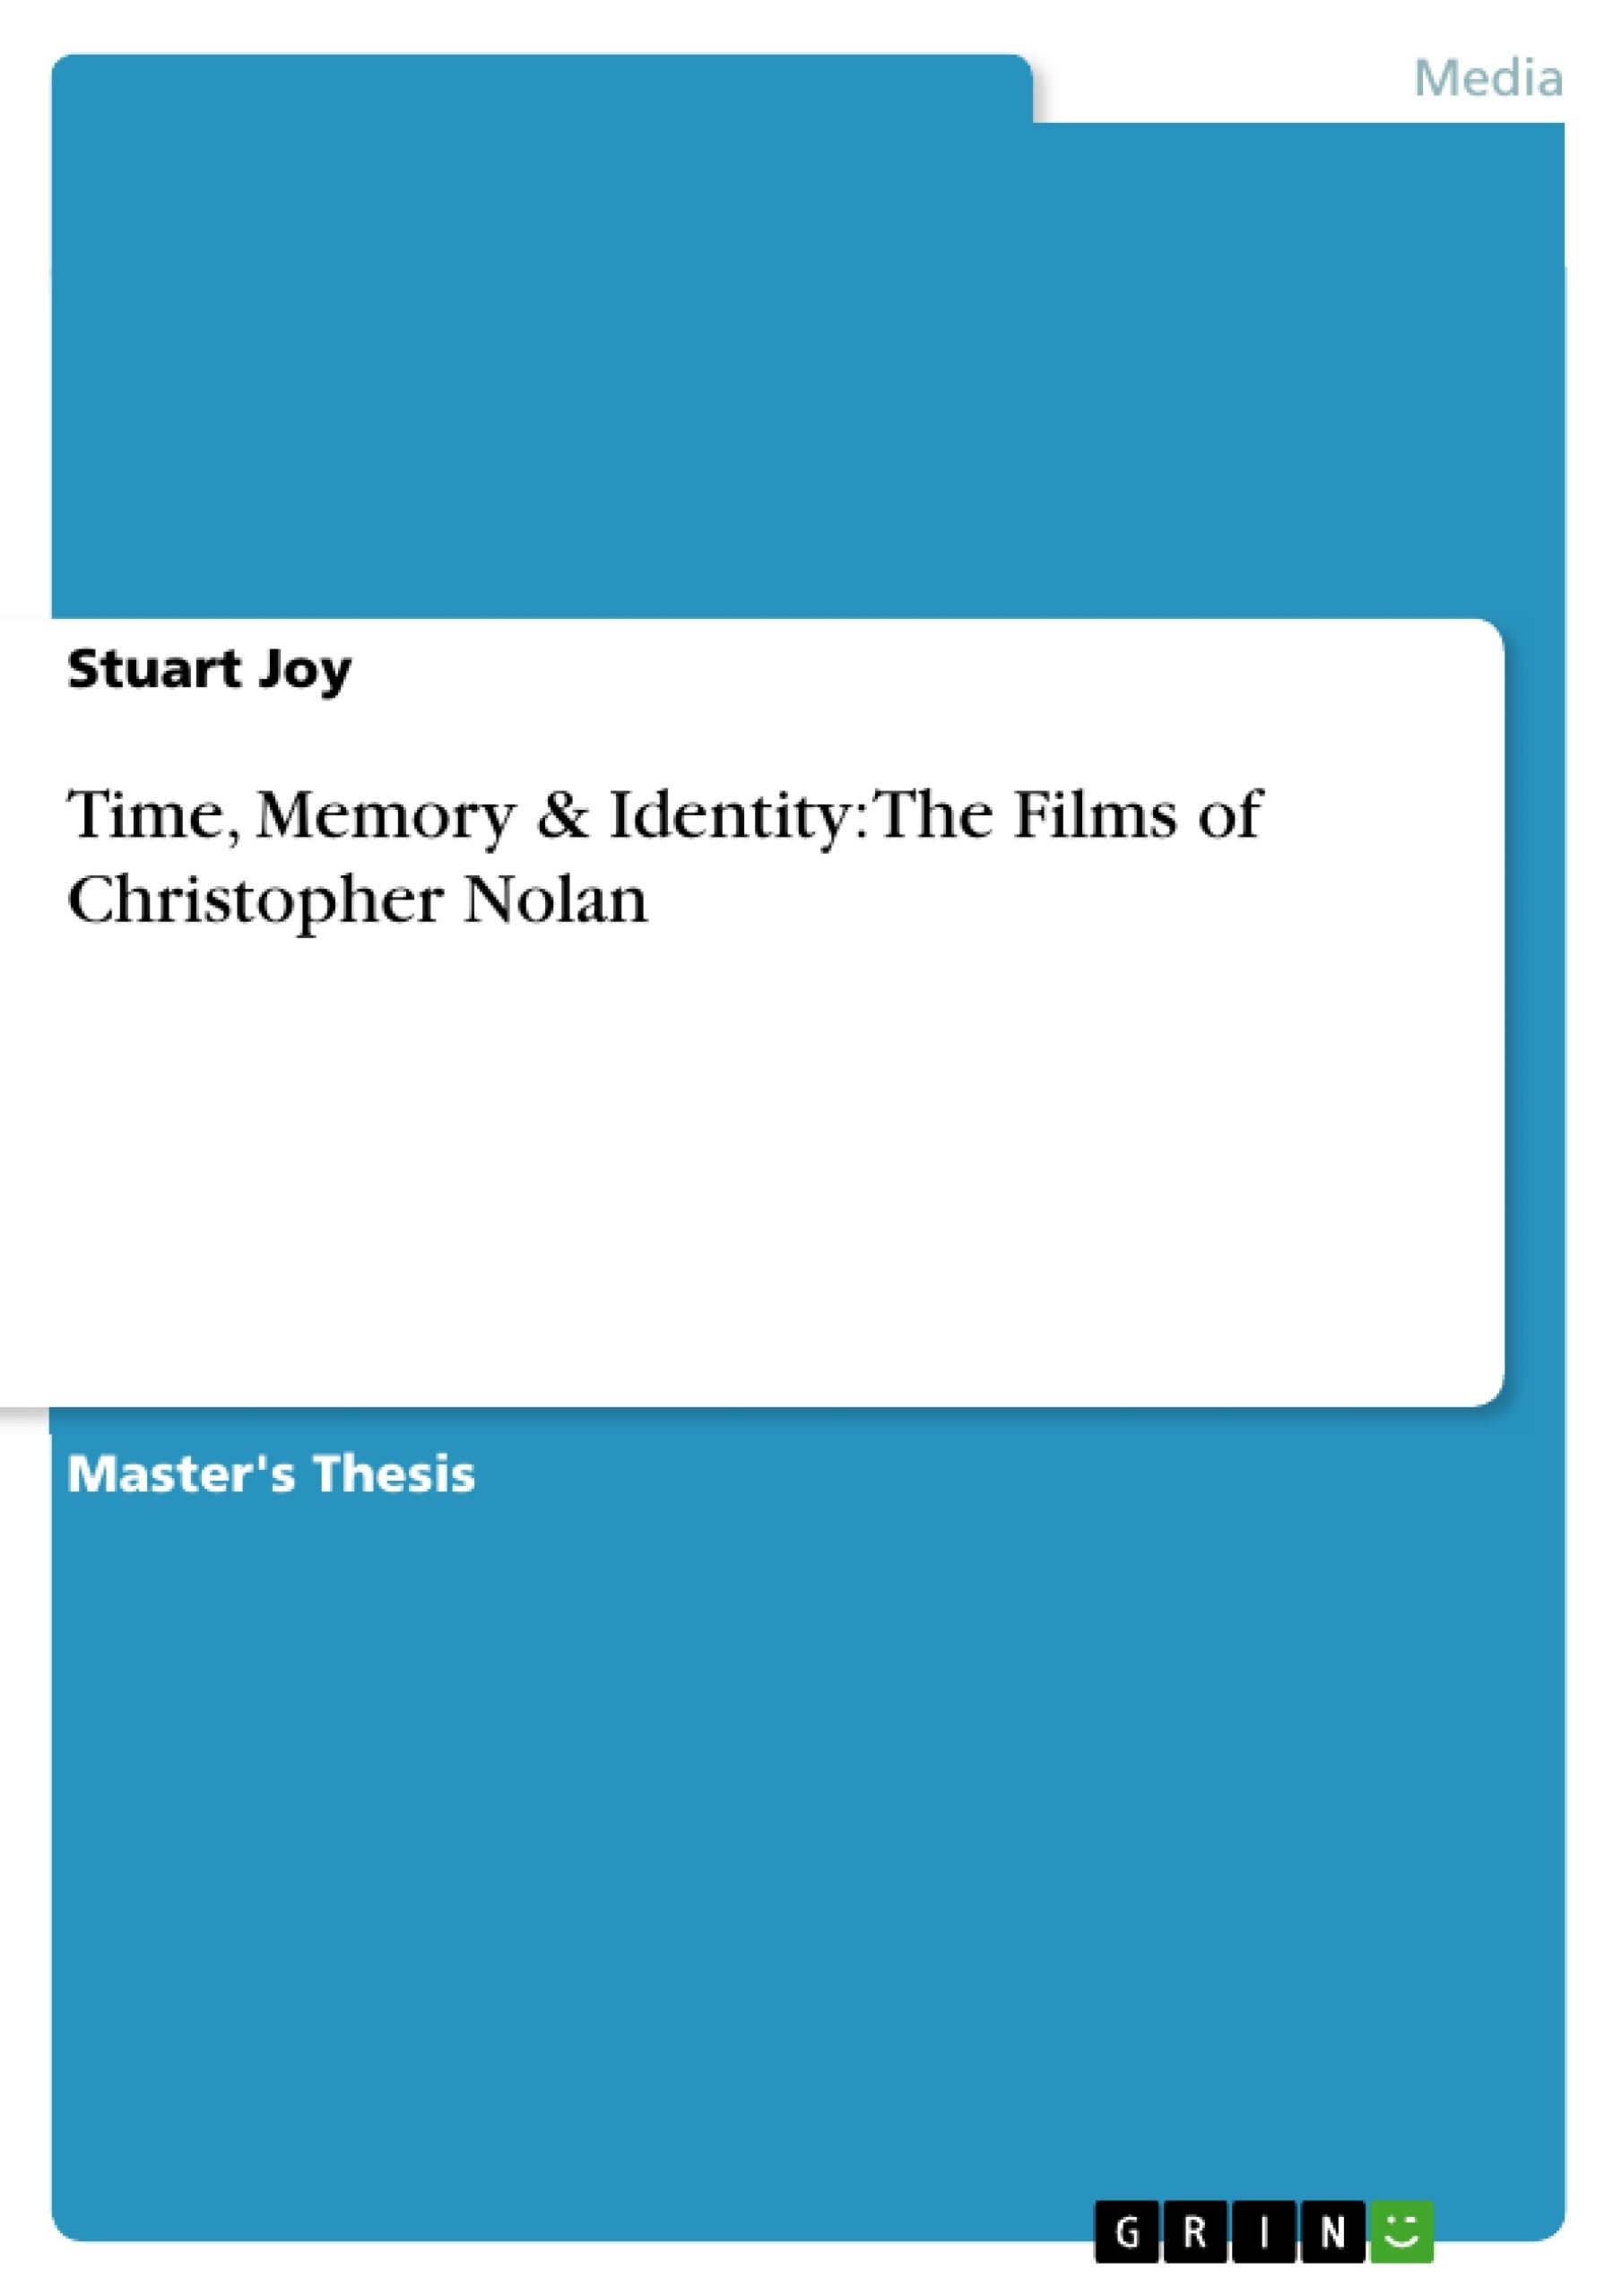 Title: Time, Memory & Identity: The Films of Christopher Nolan